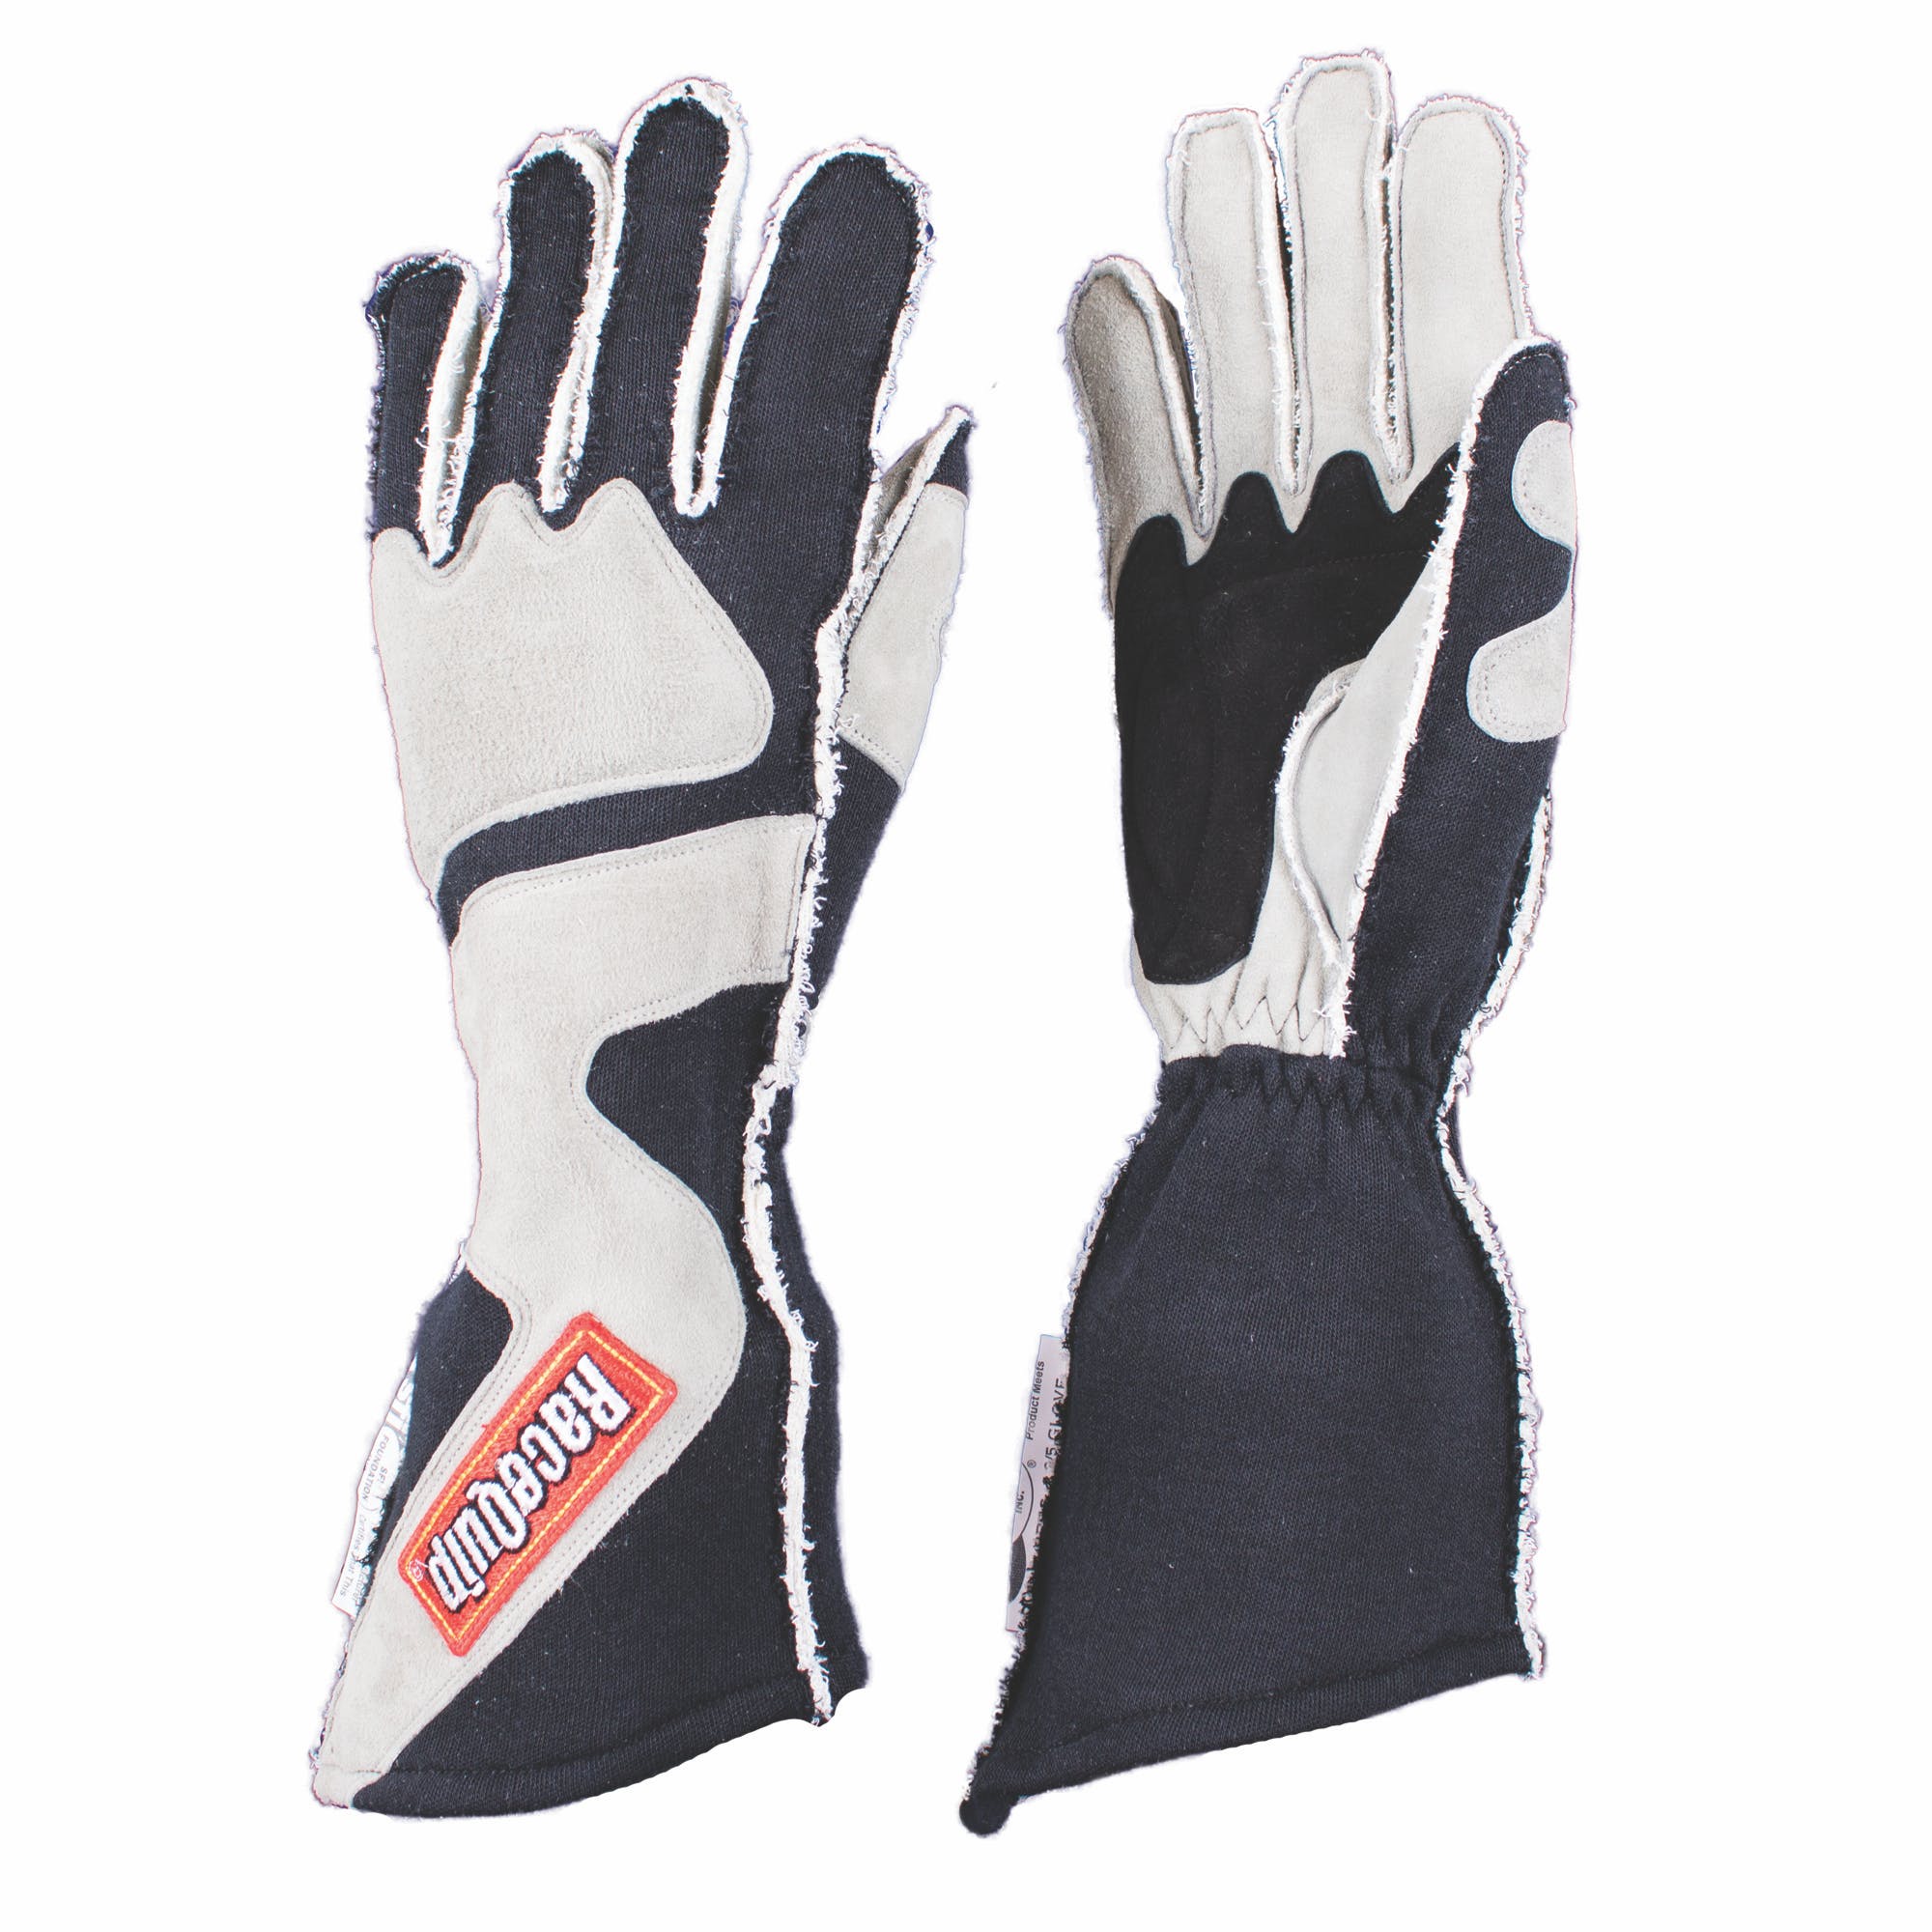 RaceQuip 359606 SFI-5 Out Seam Angle-Cut Gauntlet Racing Gloves (Gray/Black, X-Large)